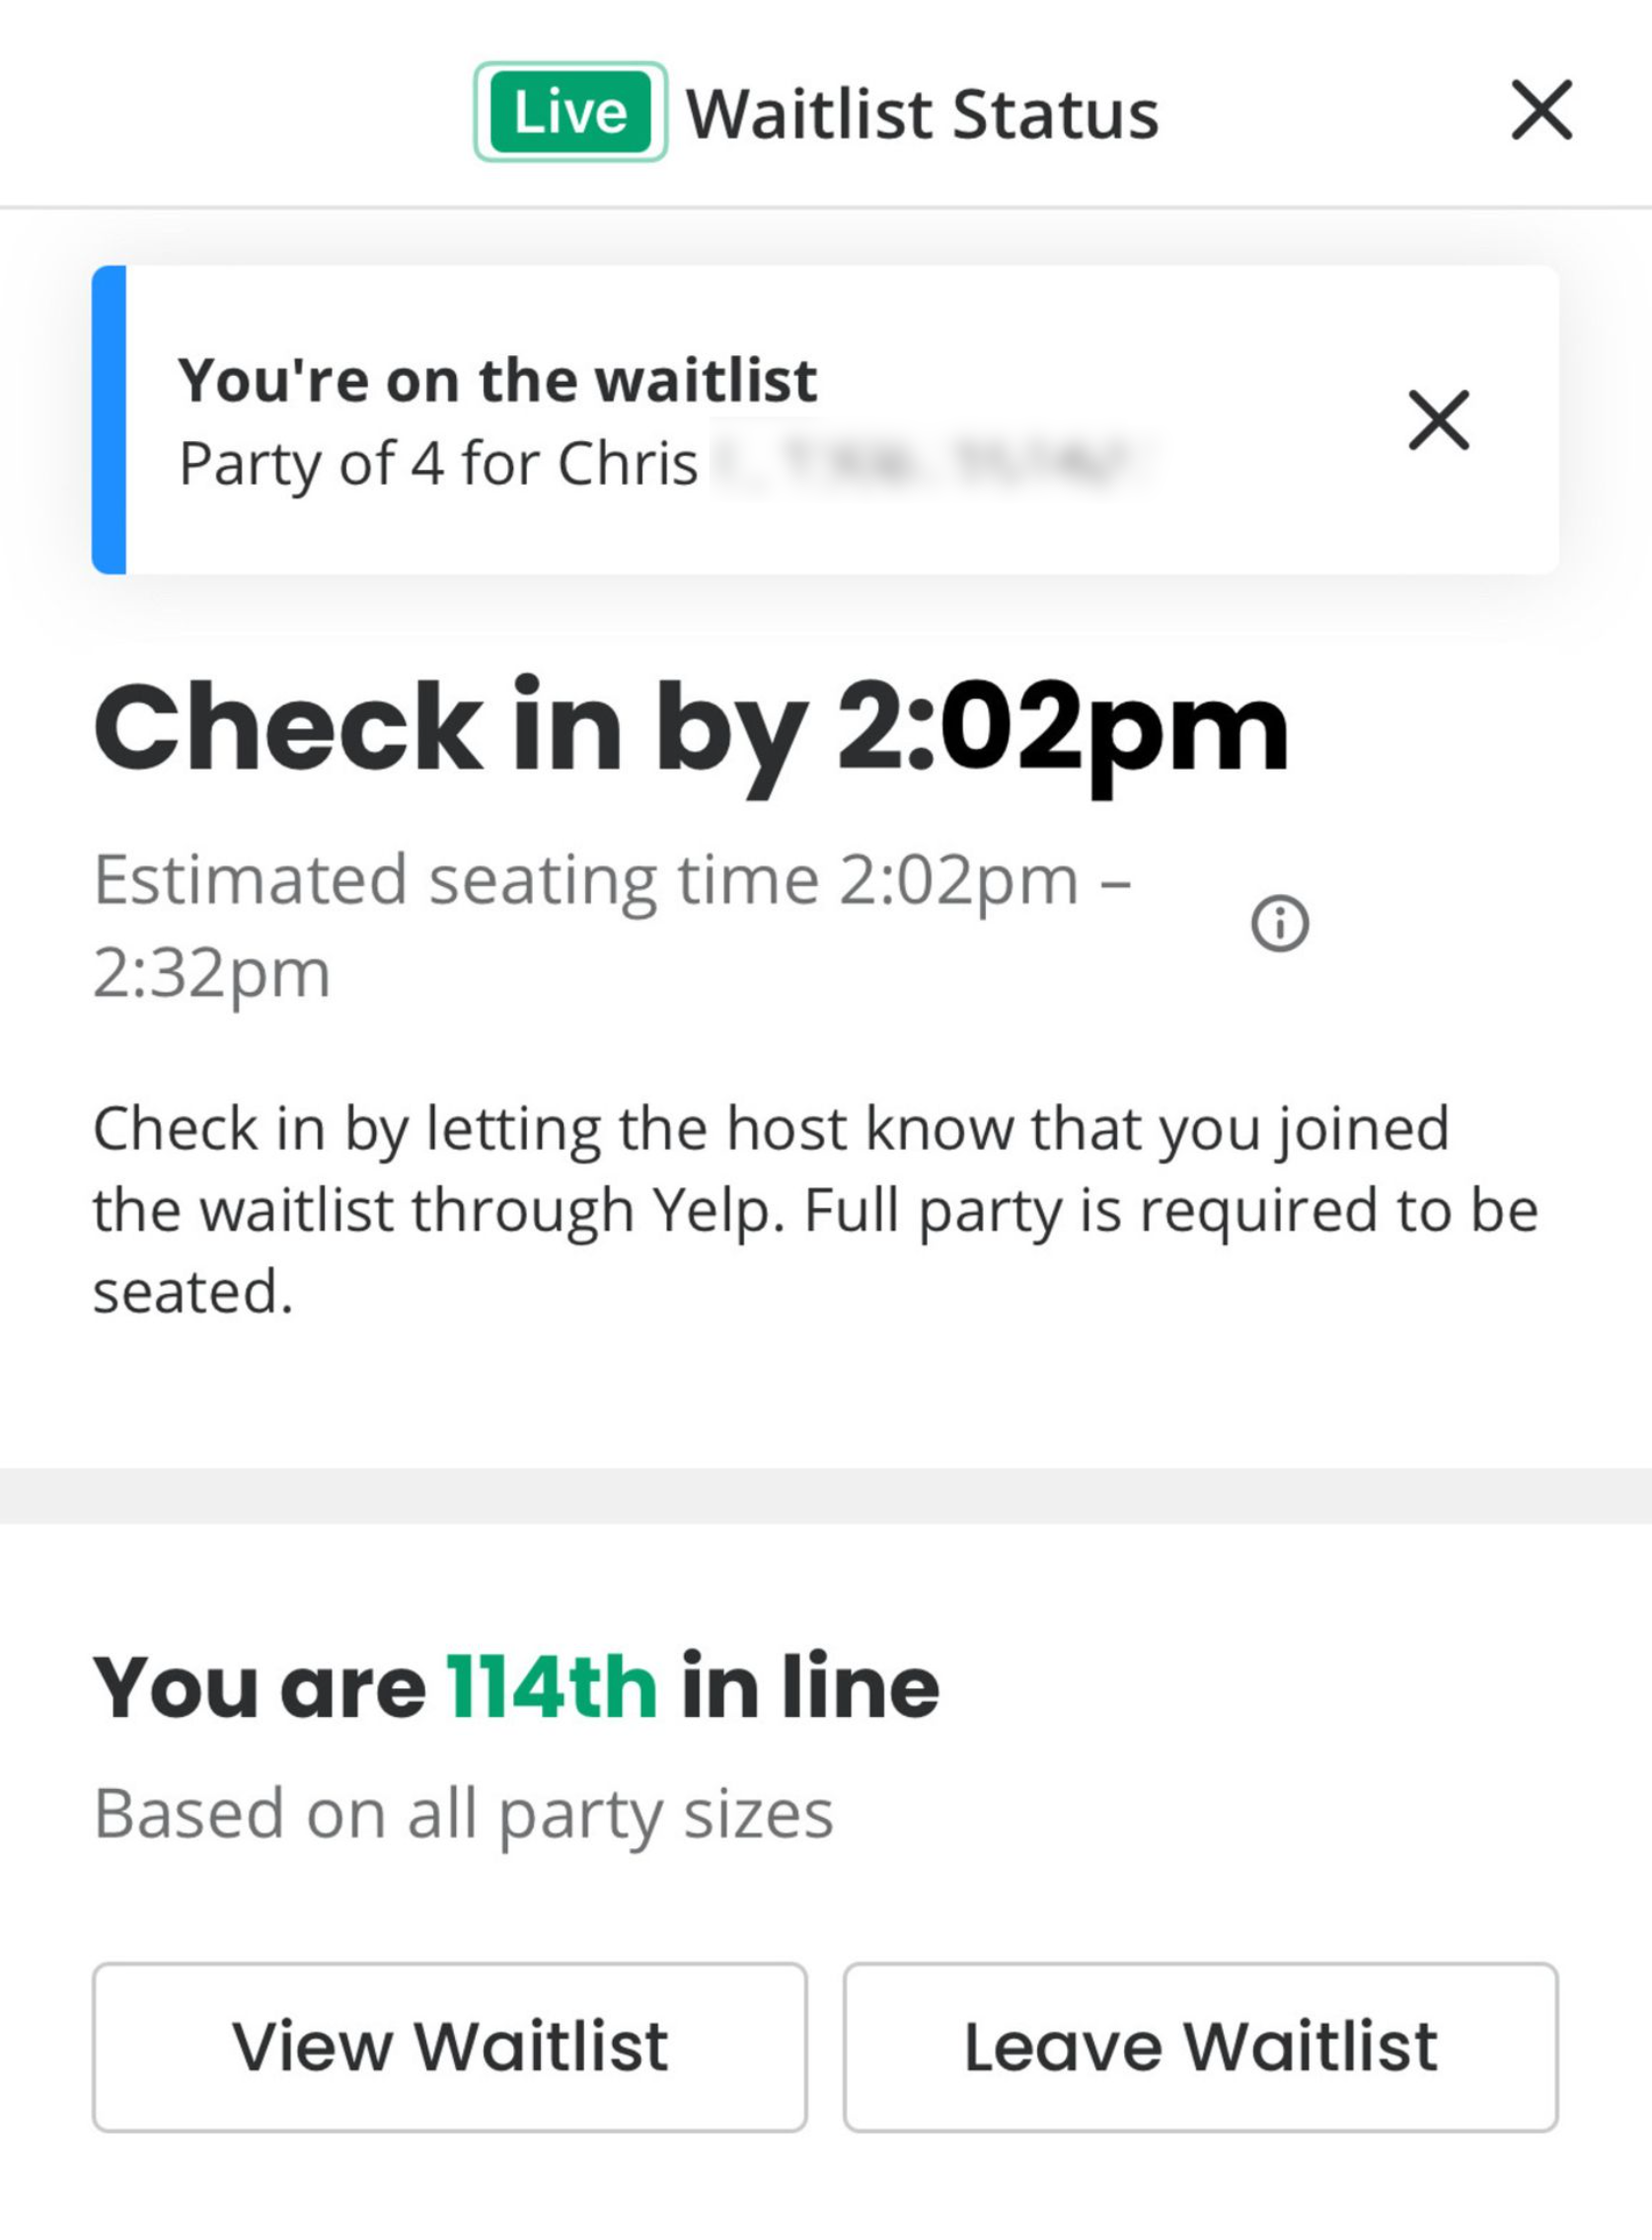 Screenshot of a waitlist for a Yelp restaurant waitlist showing that we’re 114th in line.